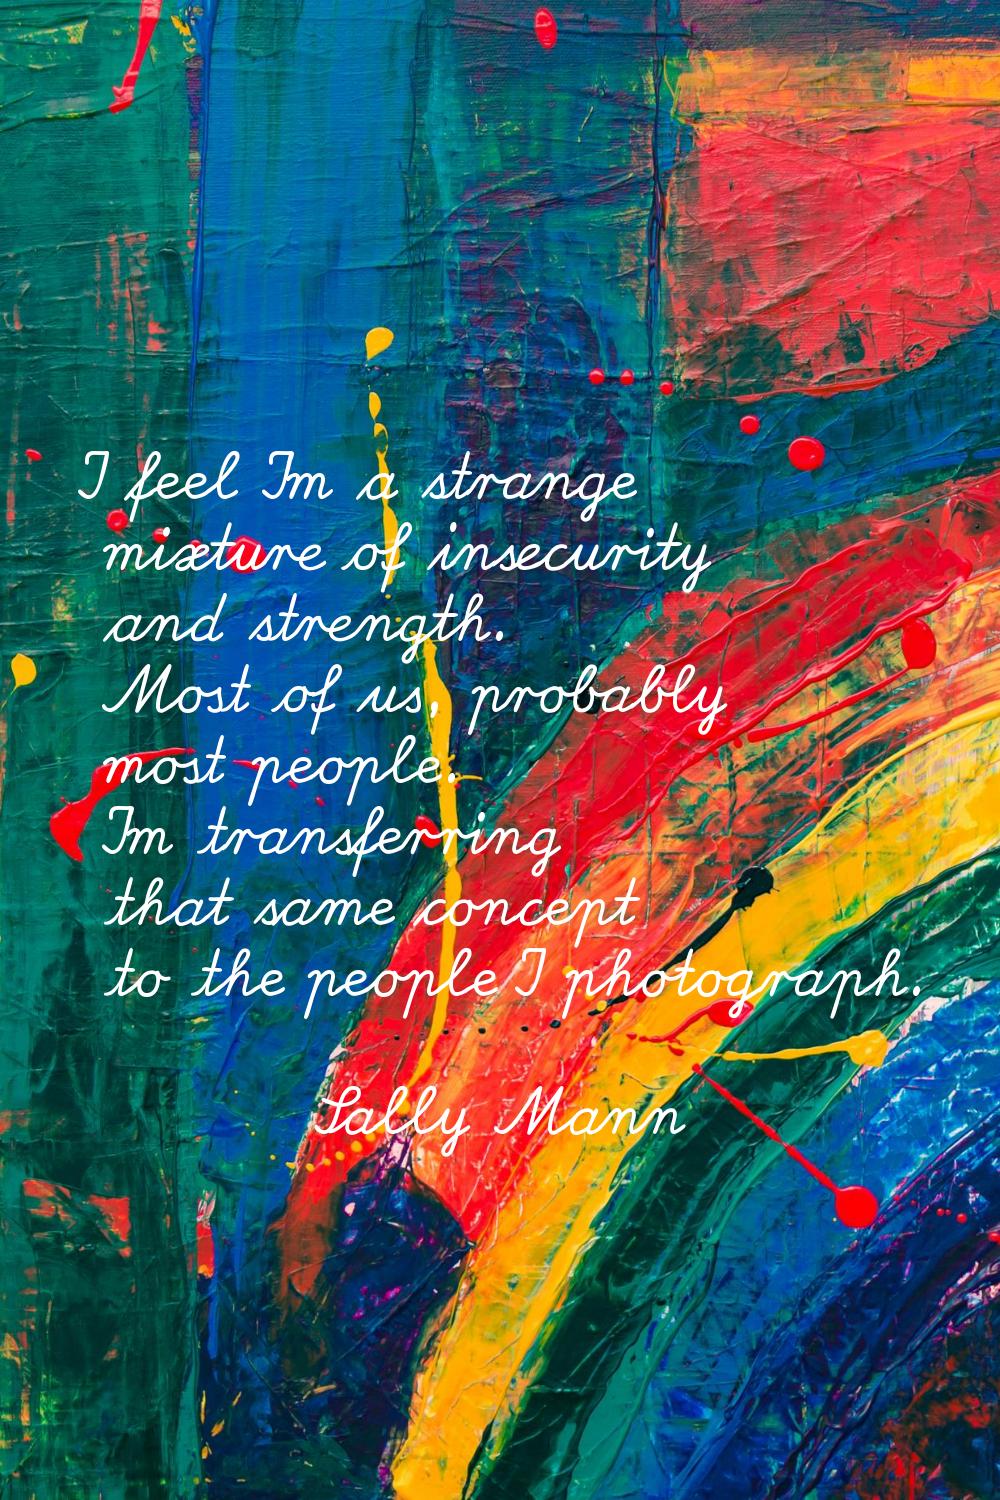 I feel I'm a strange mixture of insecurity and strength. Most of us, probably most people. I'm tran